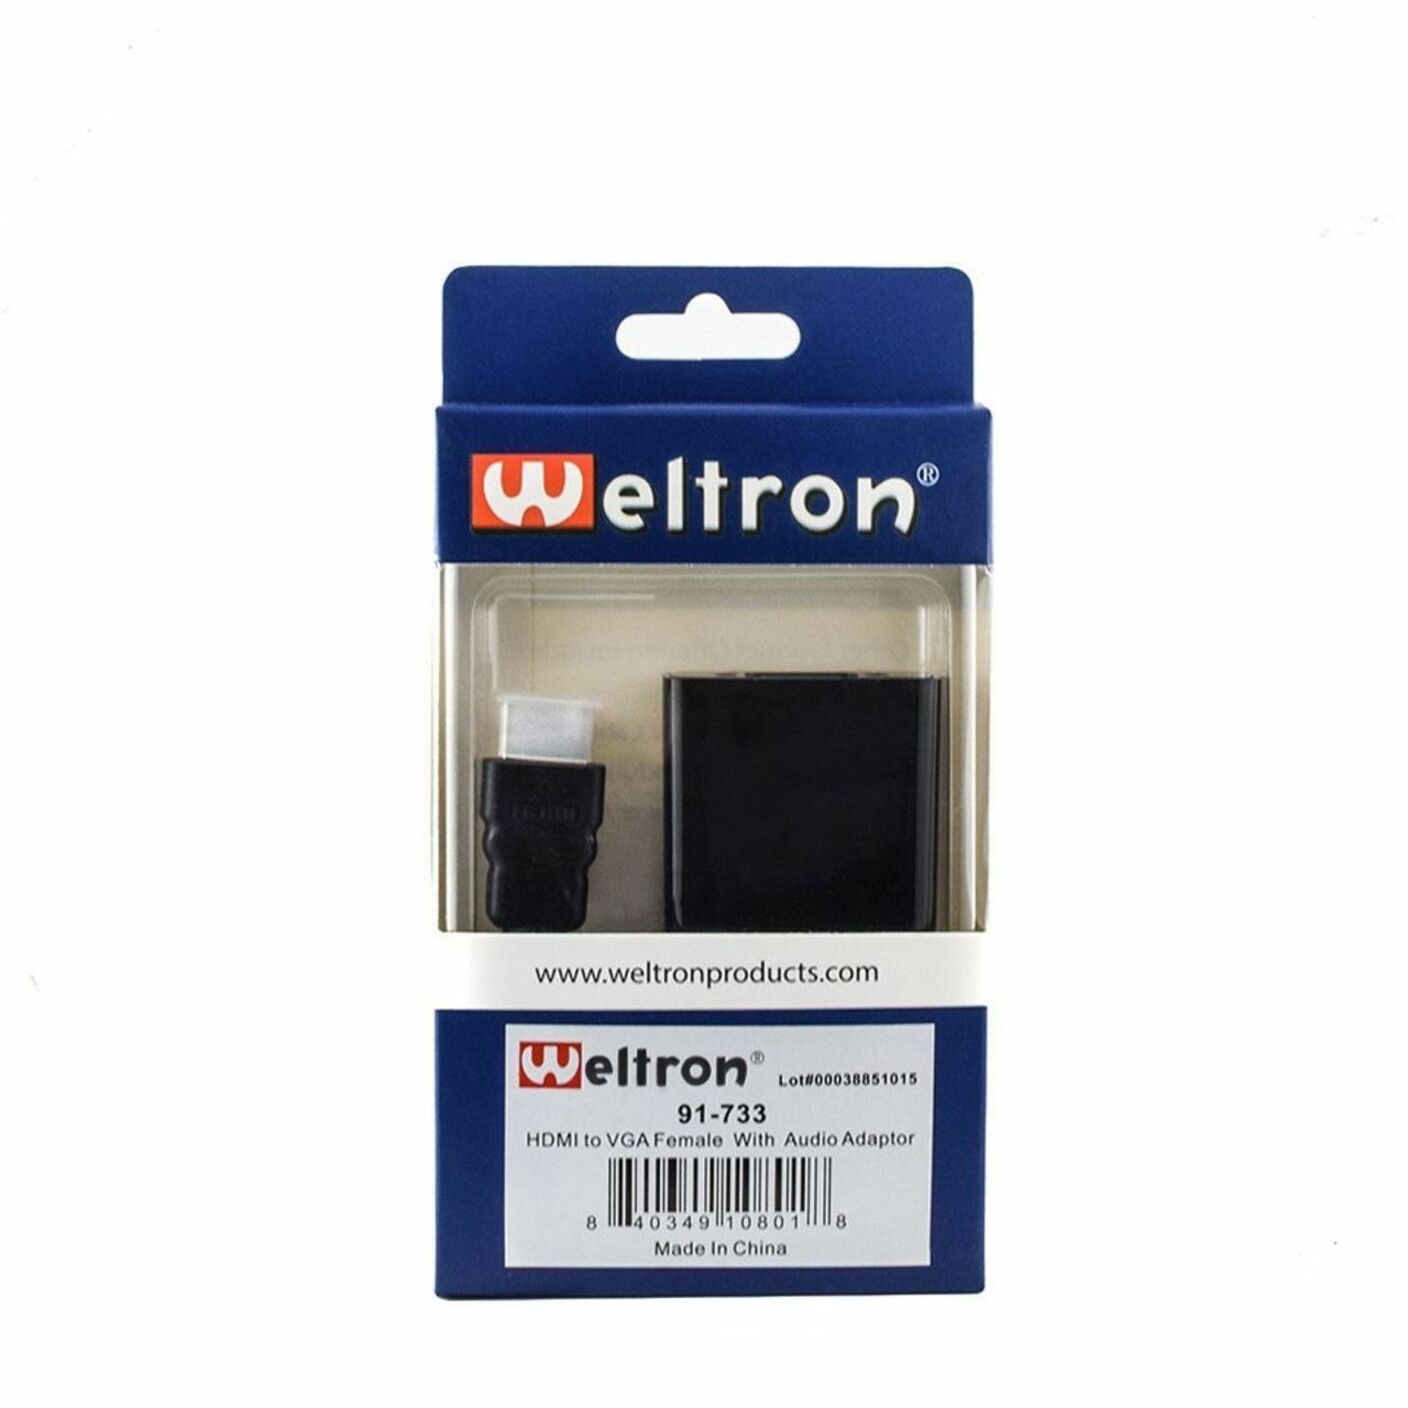 Weltron HDMI To VGA Adapter (91-733)